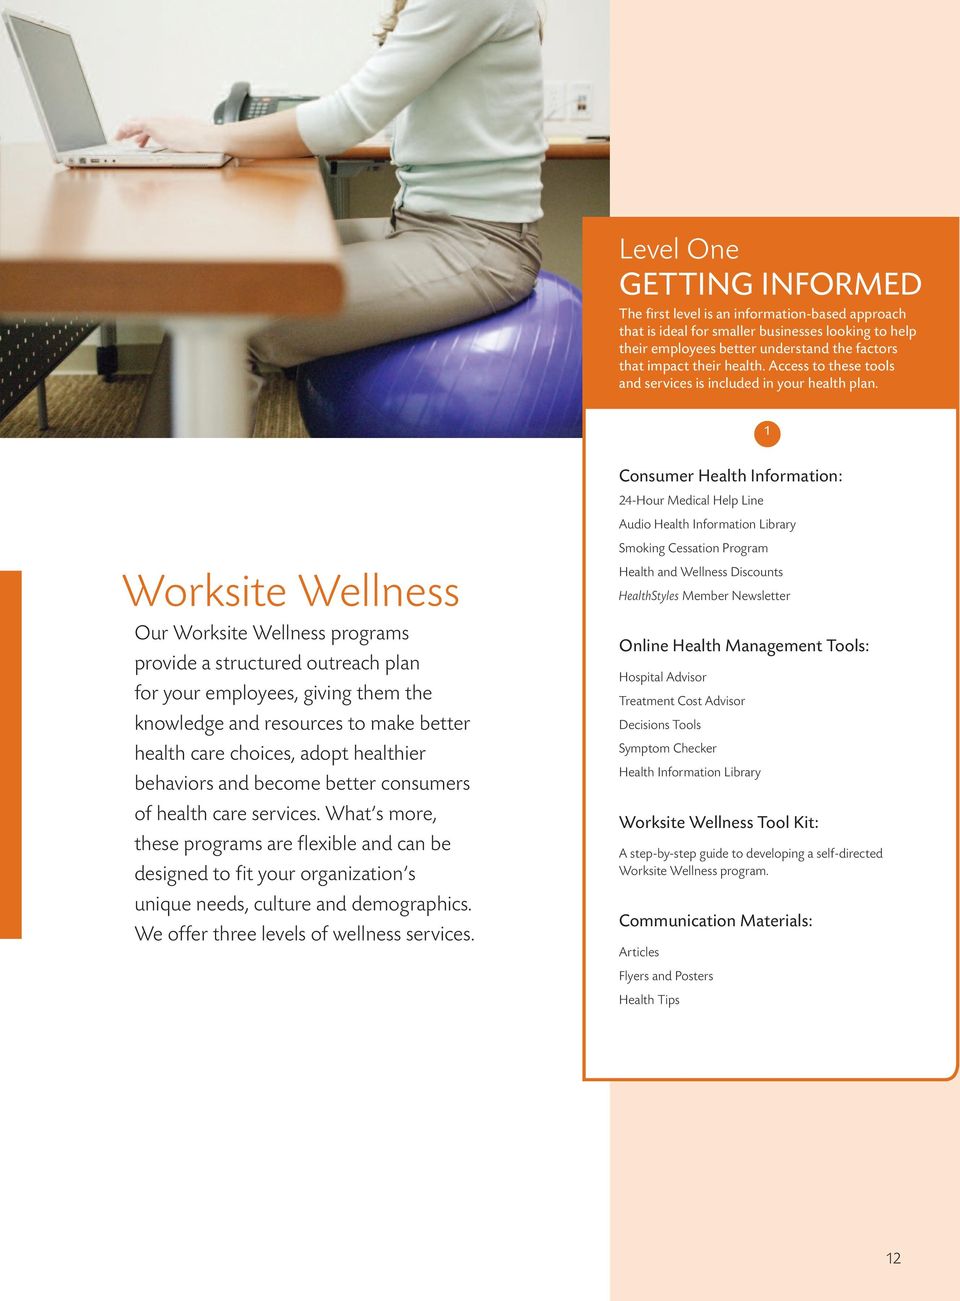 1 Worksite Wellness Our Worksite Wellness programs provide a structured outreach plan for your employees, giving them the knowledge and resources to make better health care choices, adopt healthier